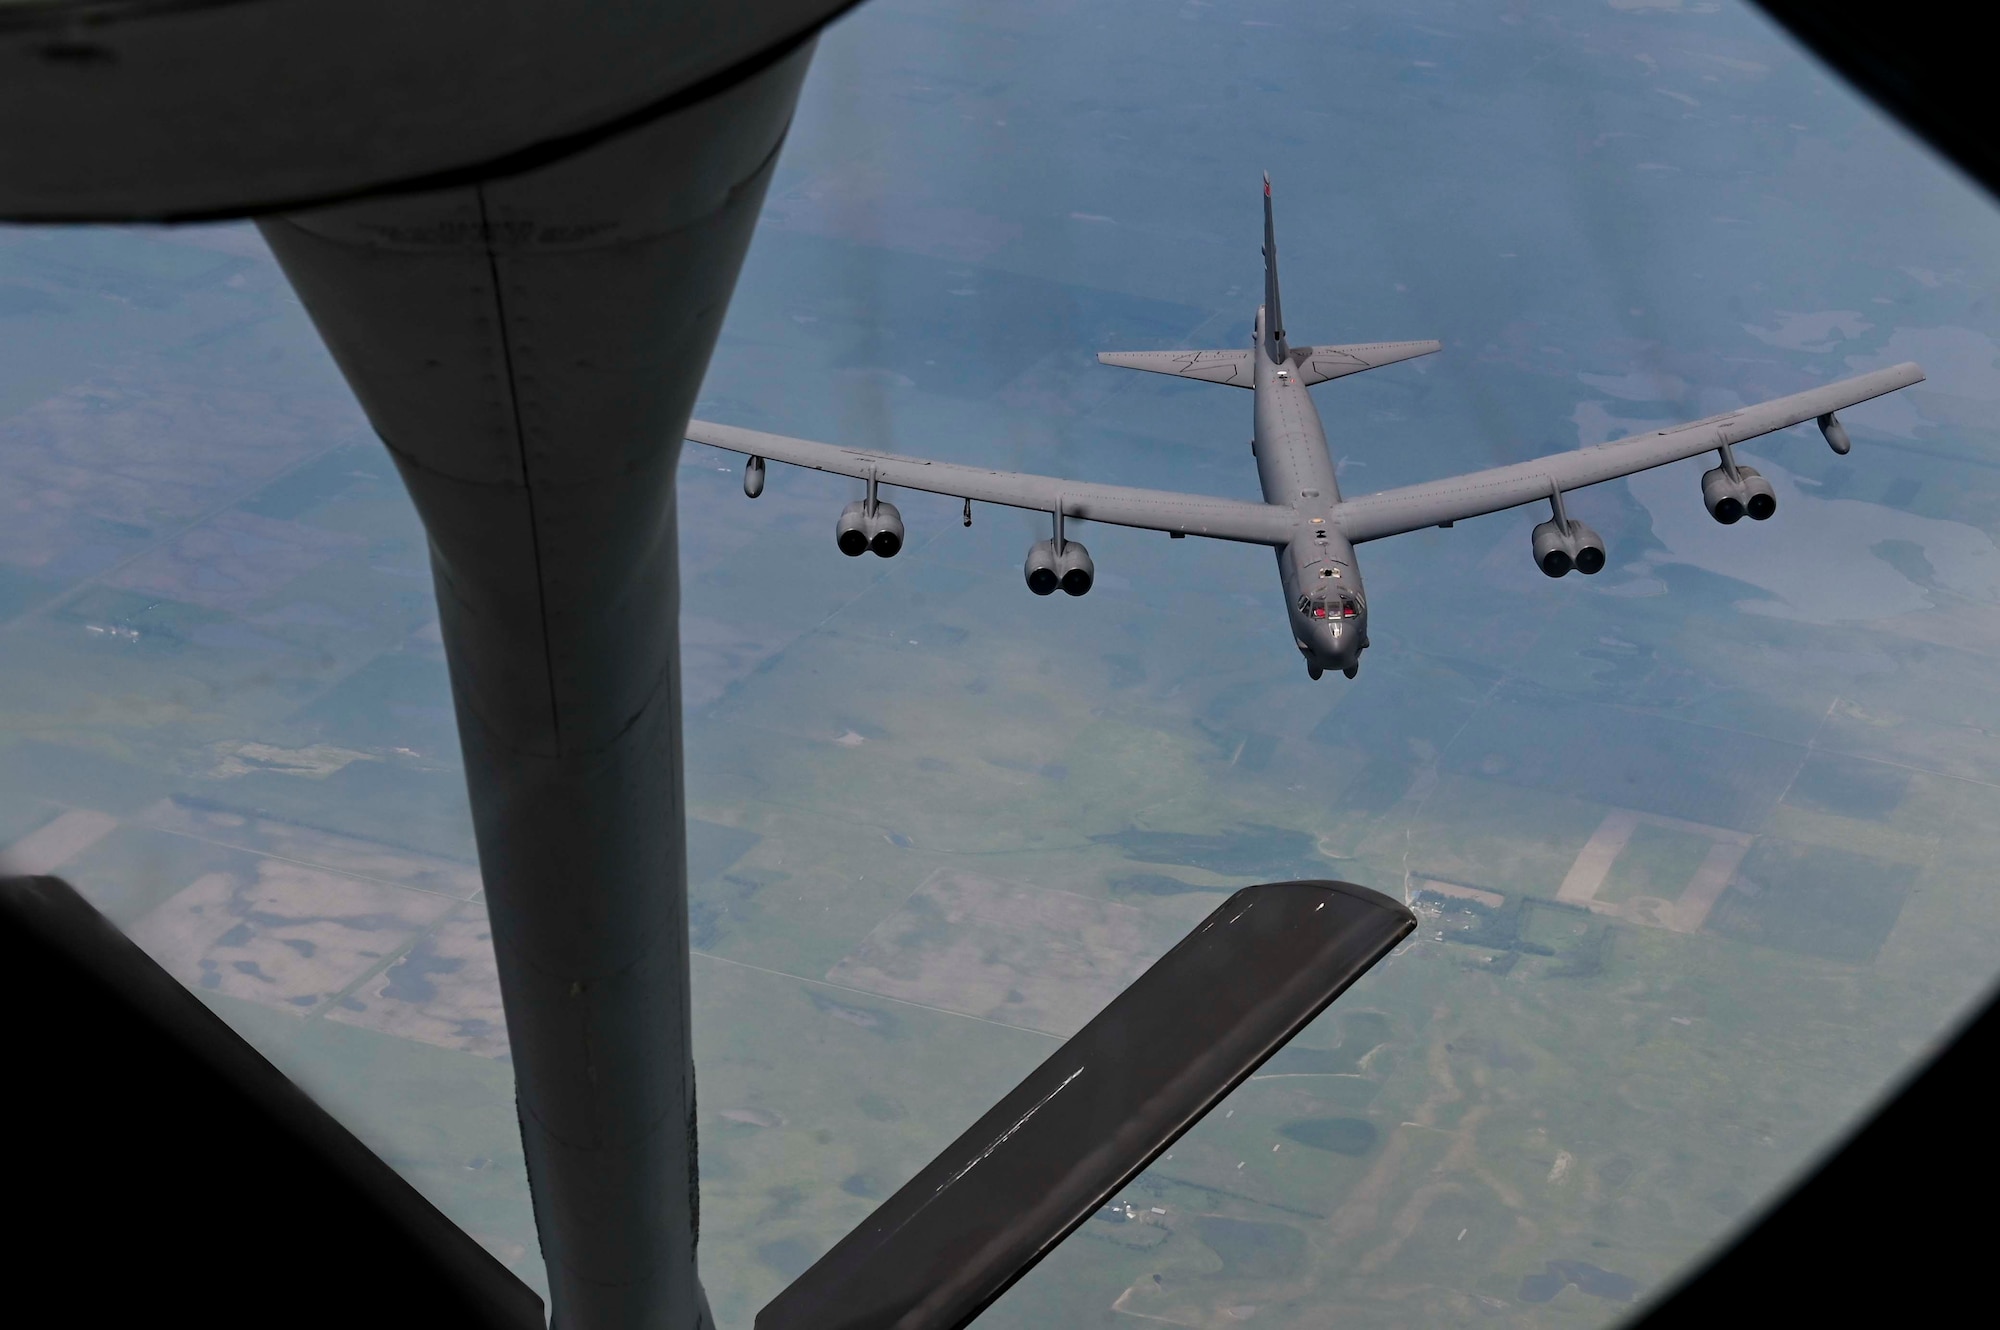 KC-135 Stratotanker crews assigned to the 92nd Air Refueling Wing, demonstrates aerial refueling capabilities alongside a Boeing B-52 Stratofortress, from Minot Air Force Base, as part of Operation Centennial Contact out of Fairchild Air Force Base, Wash., June 27, 2023. The movement, which included stops at Yellowstone National Park, Mount Rushmore, and Glacier National Park, was part of Air Mobility Command’s celebration of 100 years air refueling operations and demonstrated the 92nd Air Refueling Wing’s global reach capabilities. Since its inception in 1923, Air refueling has become a crucial component of military and civilian aviation operations around the world by extending the range and endurance of aircraft and enabling them to complete missions that would otherwise be impossible or require multiple stops. As a result, this capability is essential for strategic and tactical operations, as well as humanitarian relief efforts in support of AMC, U.S. Transportation Command and Department of Defense priorities. (U.S. Air Force photo by Airman 1st Class Haiden Morris)